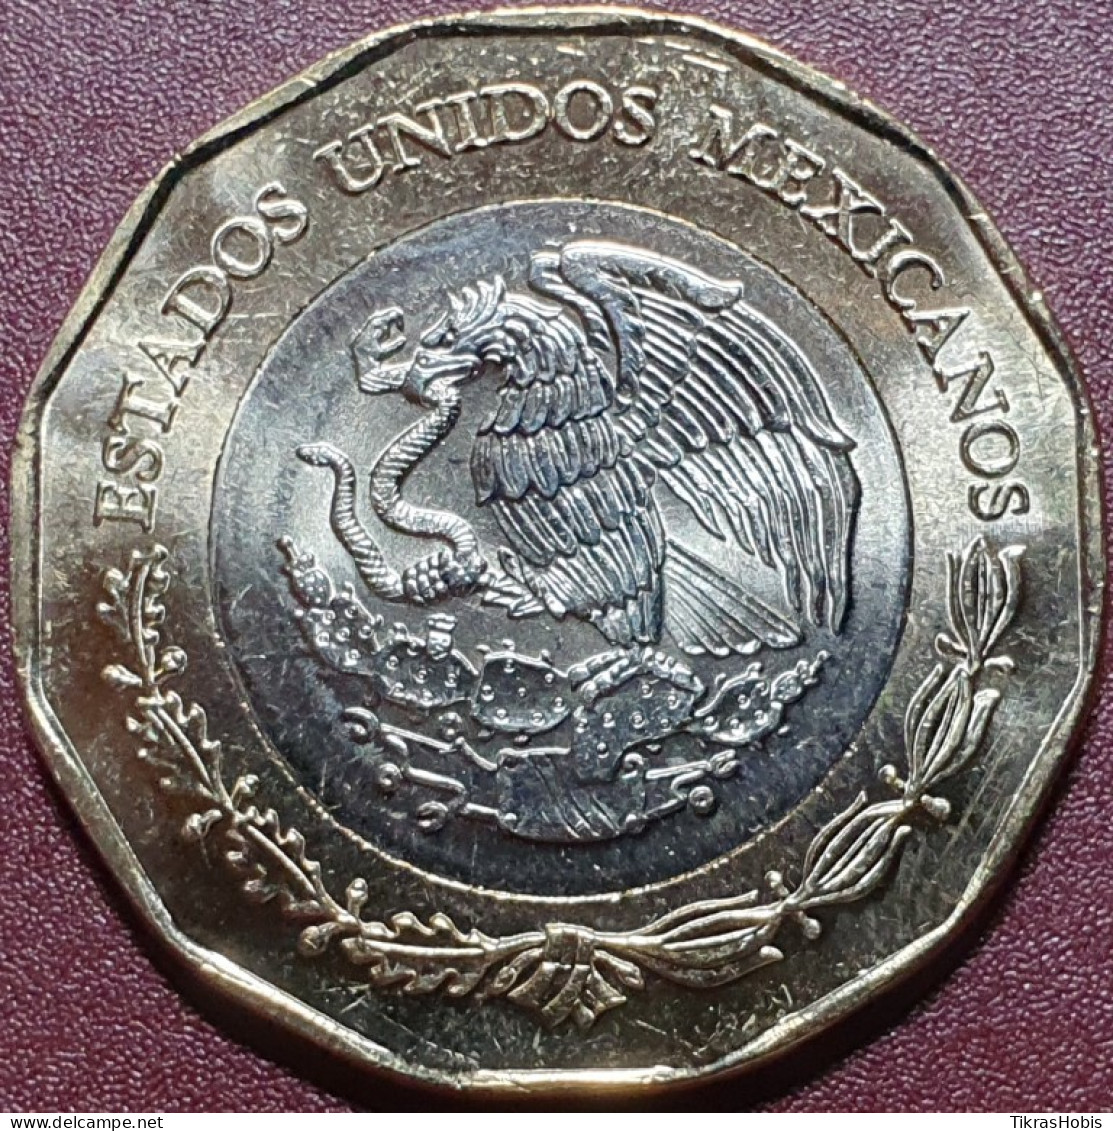 Mexico 20 Pesos, 2021 Independence 200 UC103 - Messico